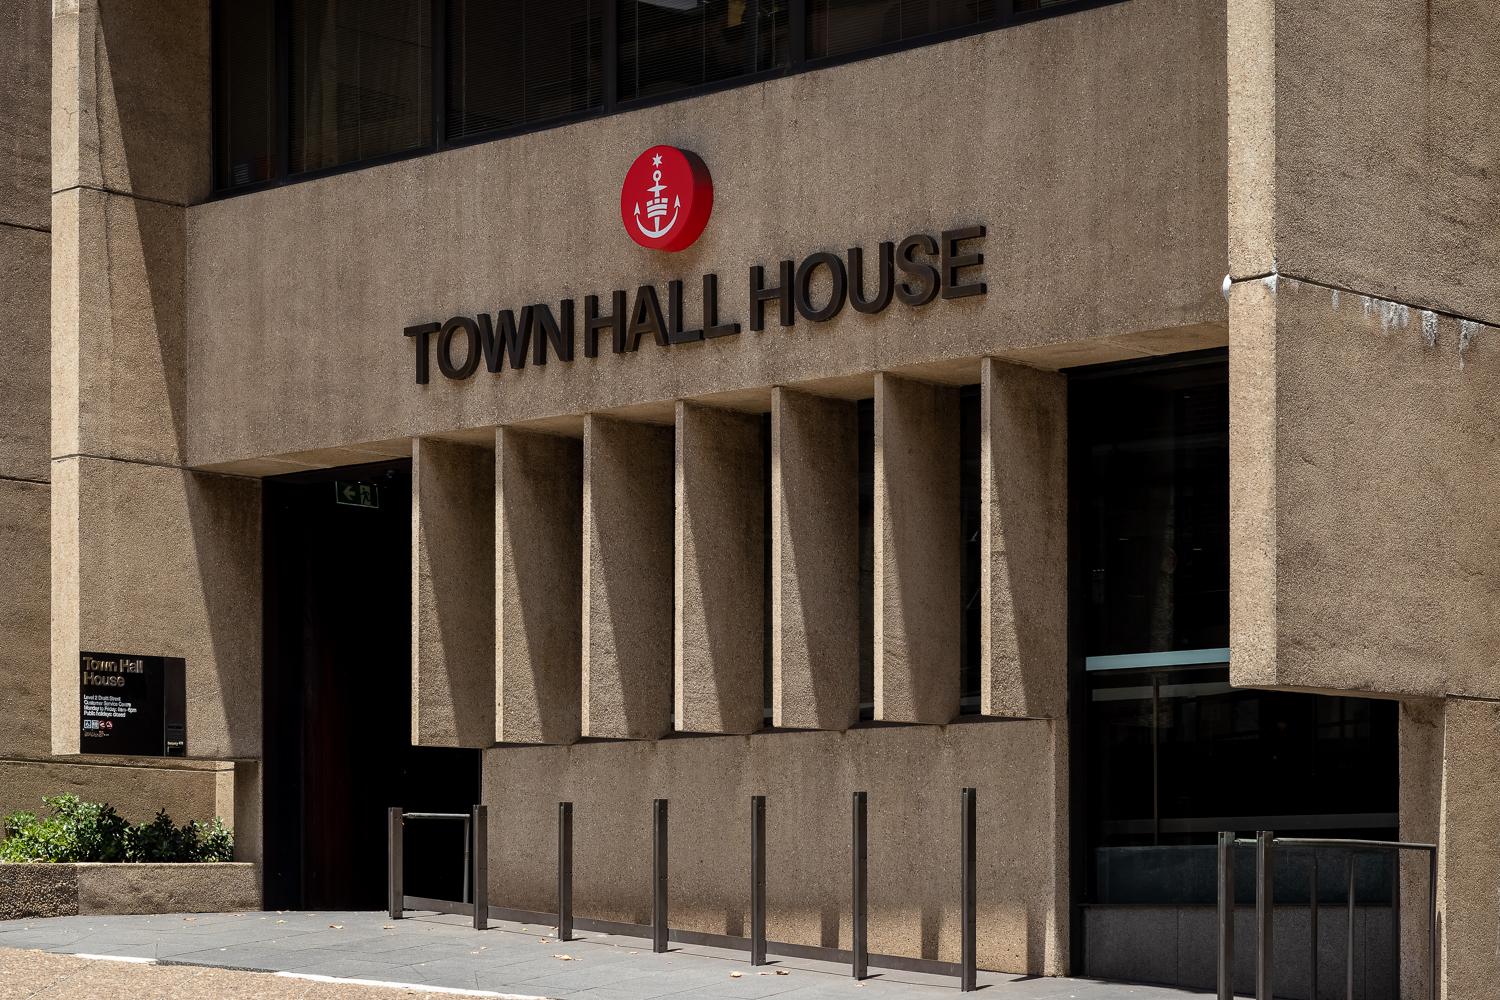 The front of a concrete building with concrete fins outside and the words TOWN HALL HOUSE